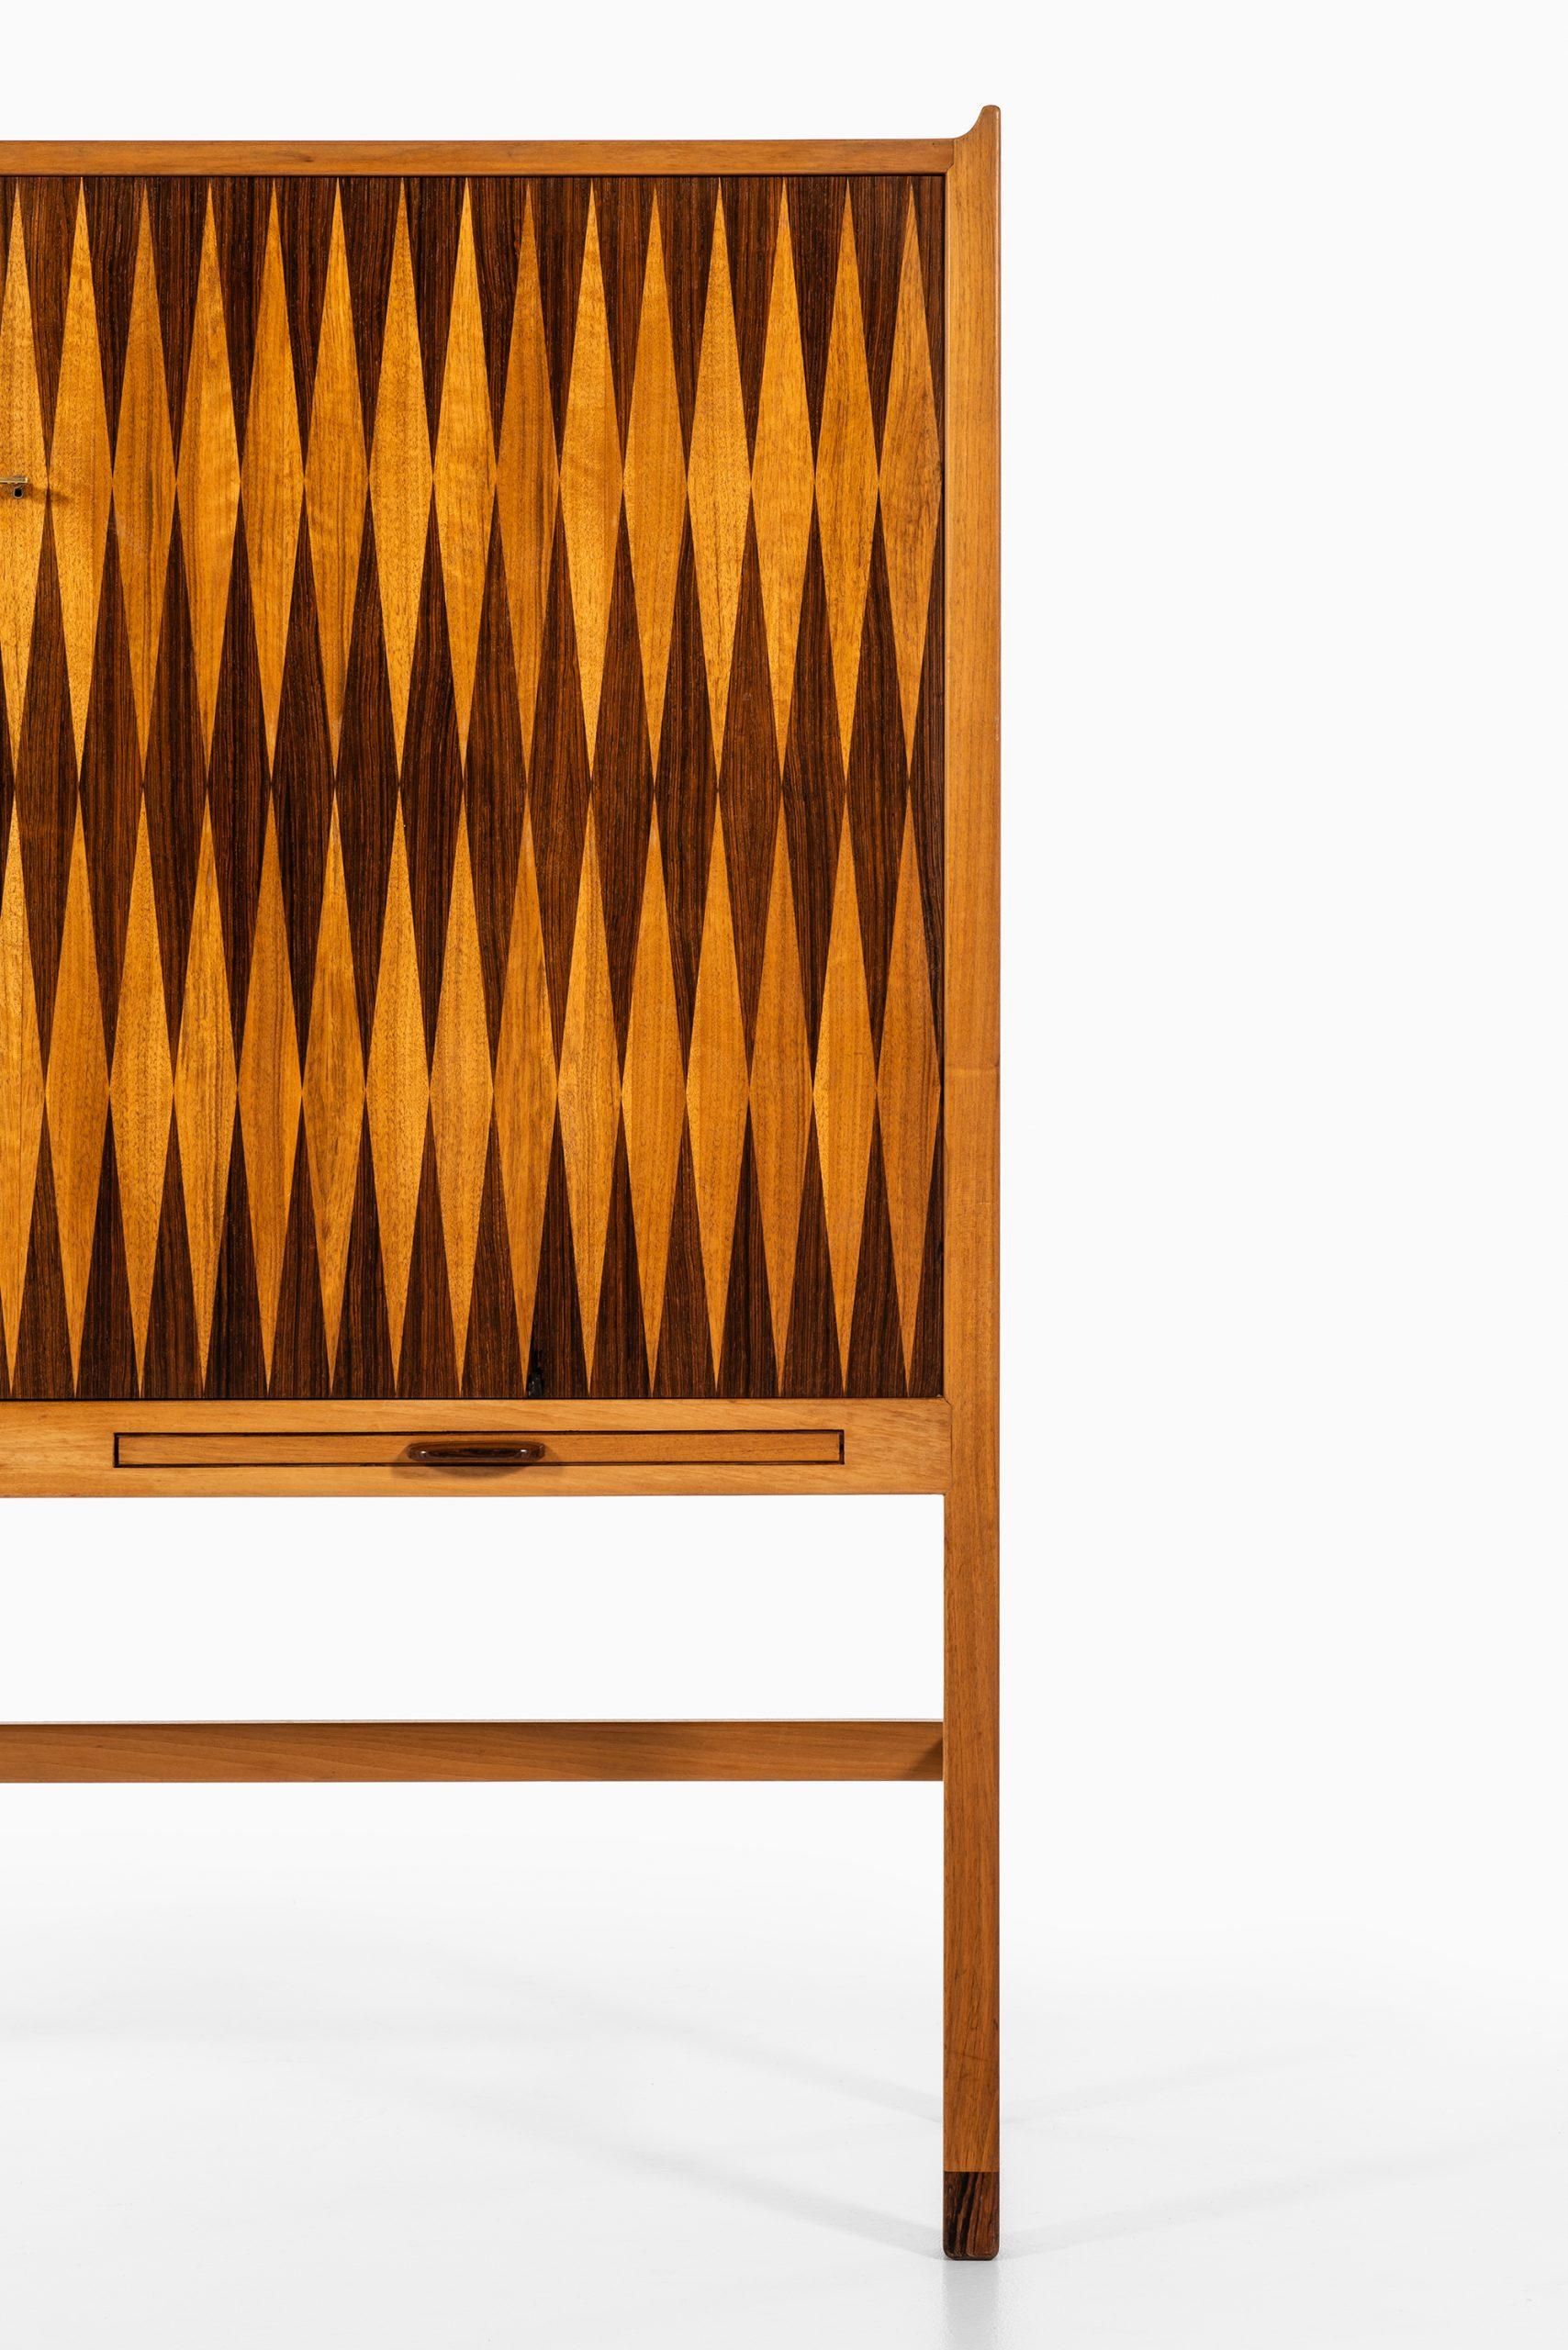 Rare cabinet with backgammon style inlays by unknown designer. Probably produced in Denmark.